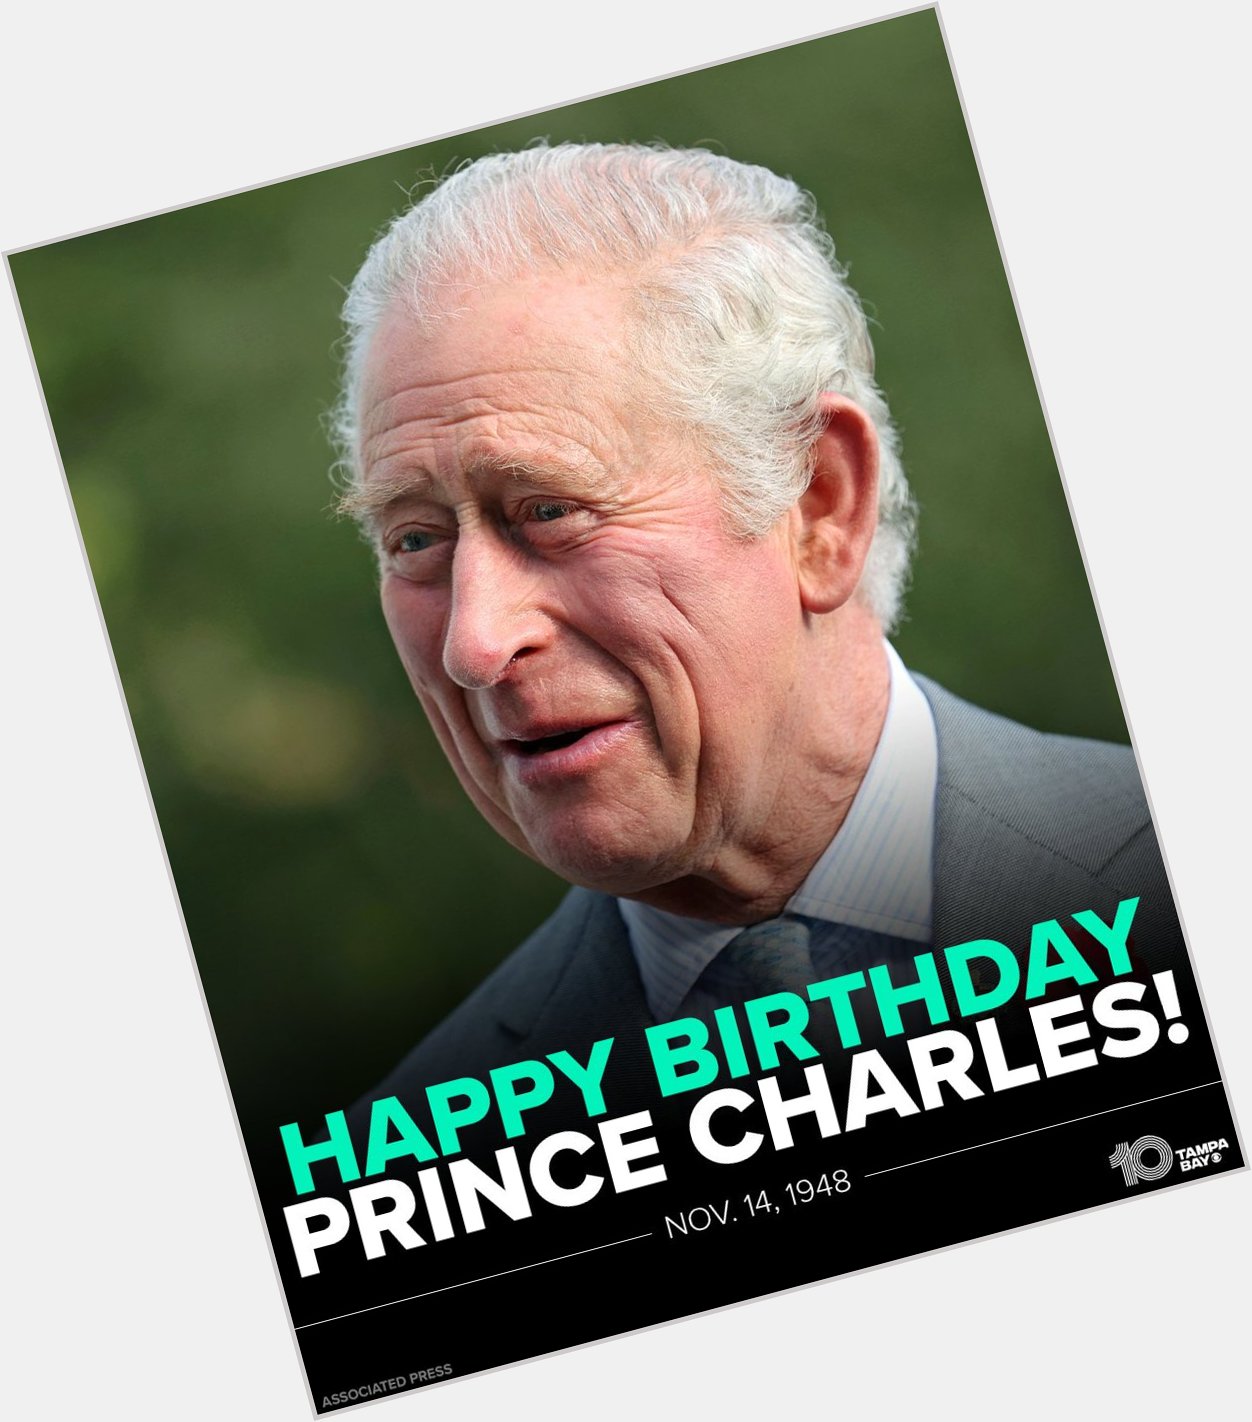 HAPPY BIRTHDAY Prince Charles is celebrating his 73rd birthday today! 